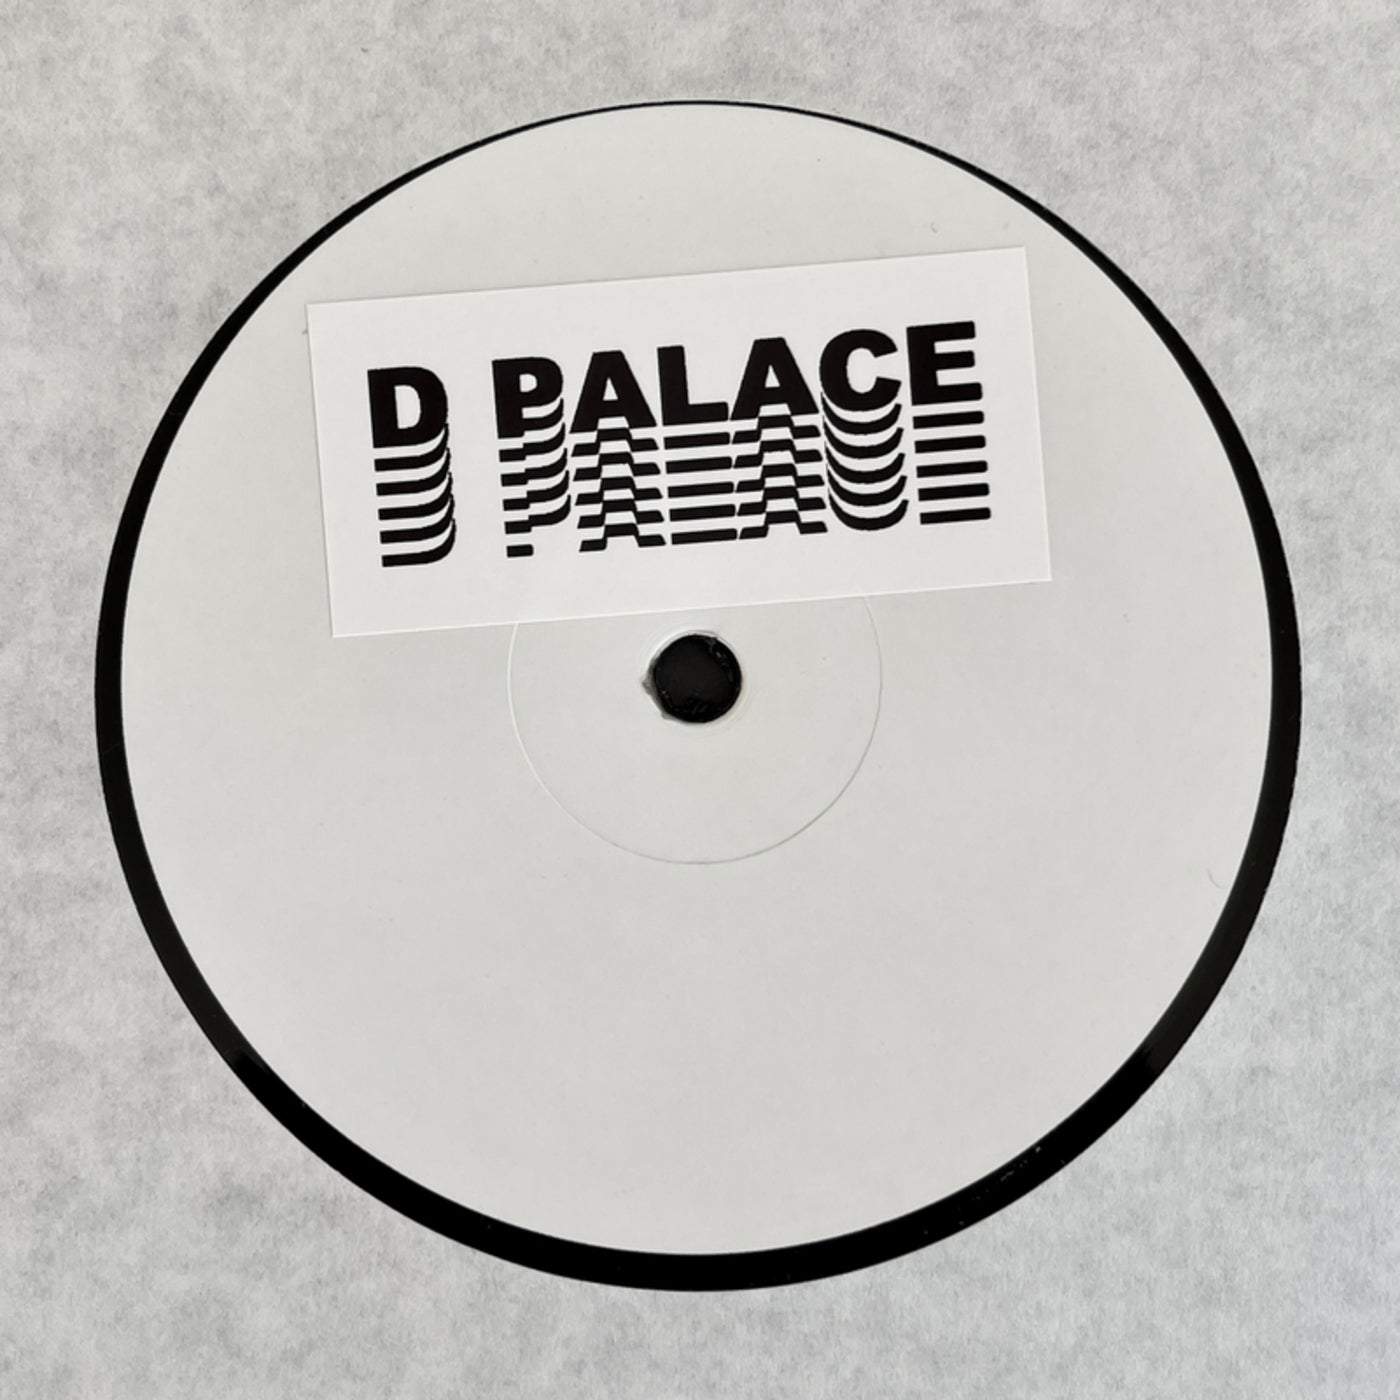 image cover: D Palace - DPAL002 / DPAL002